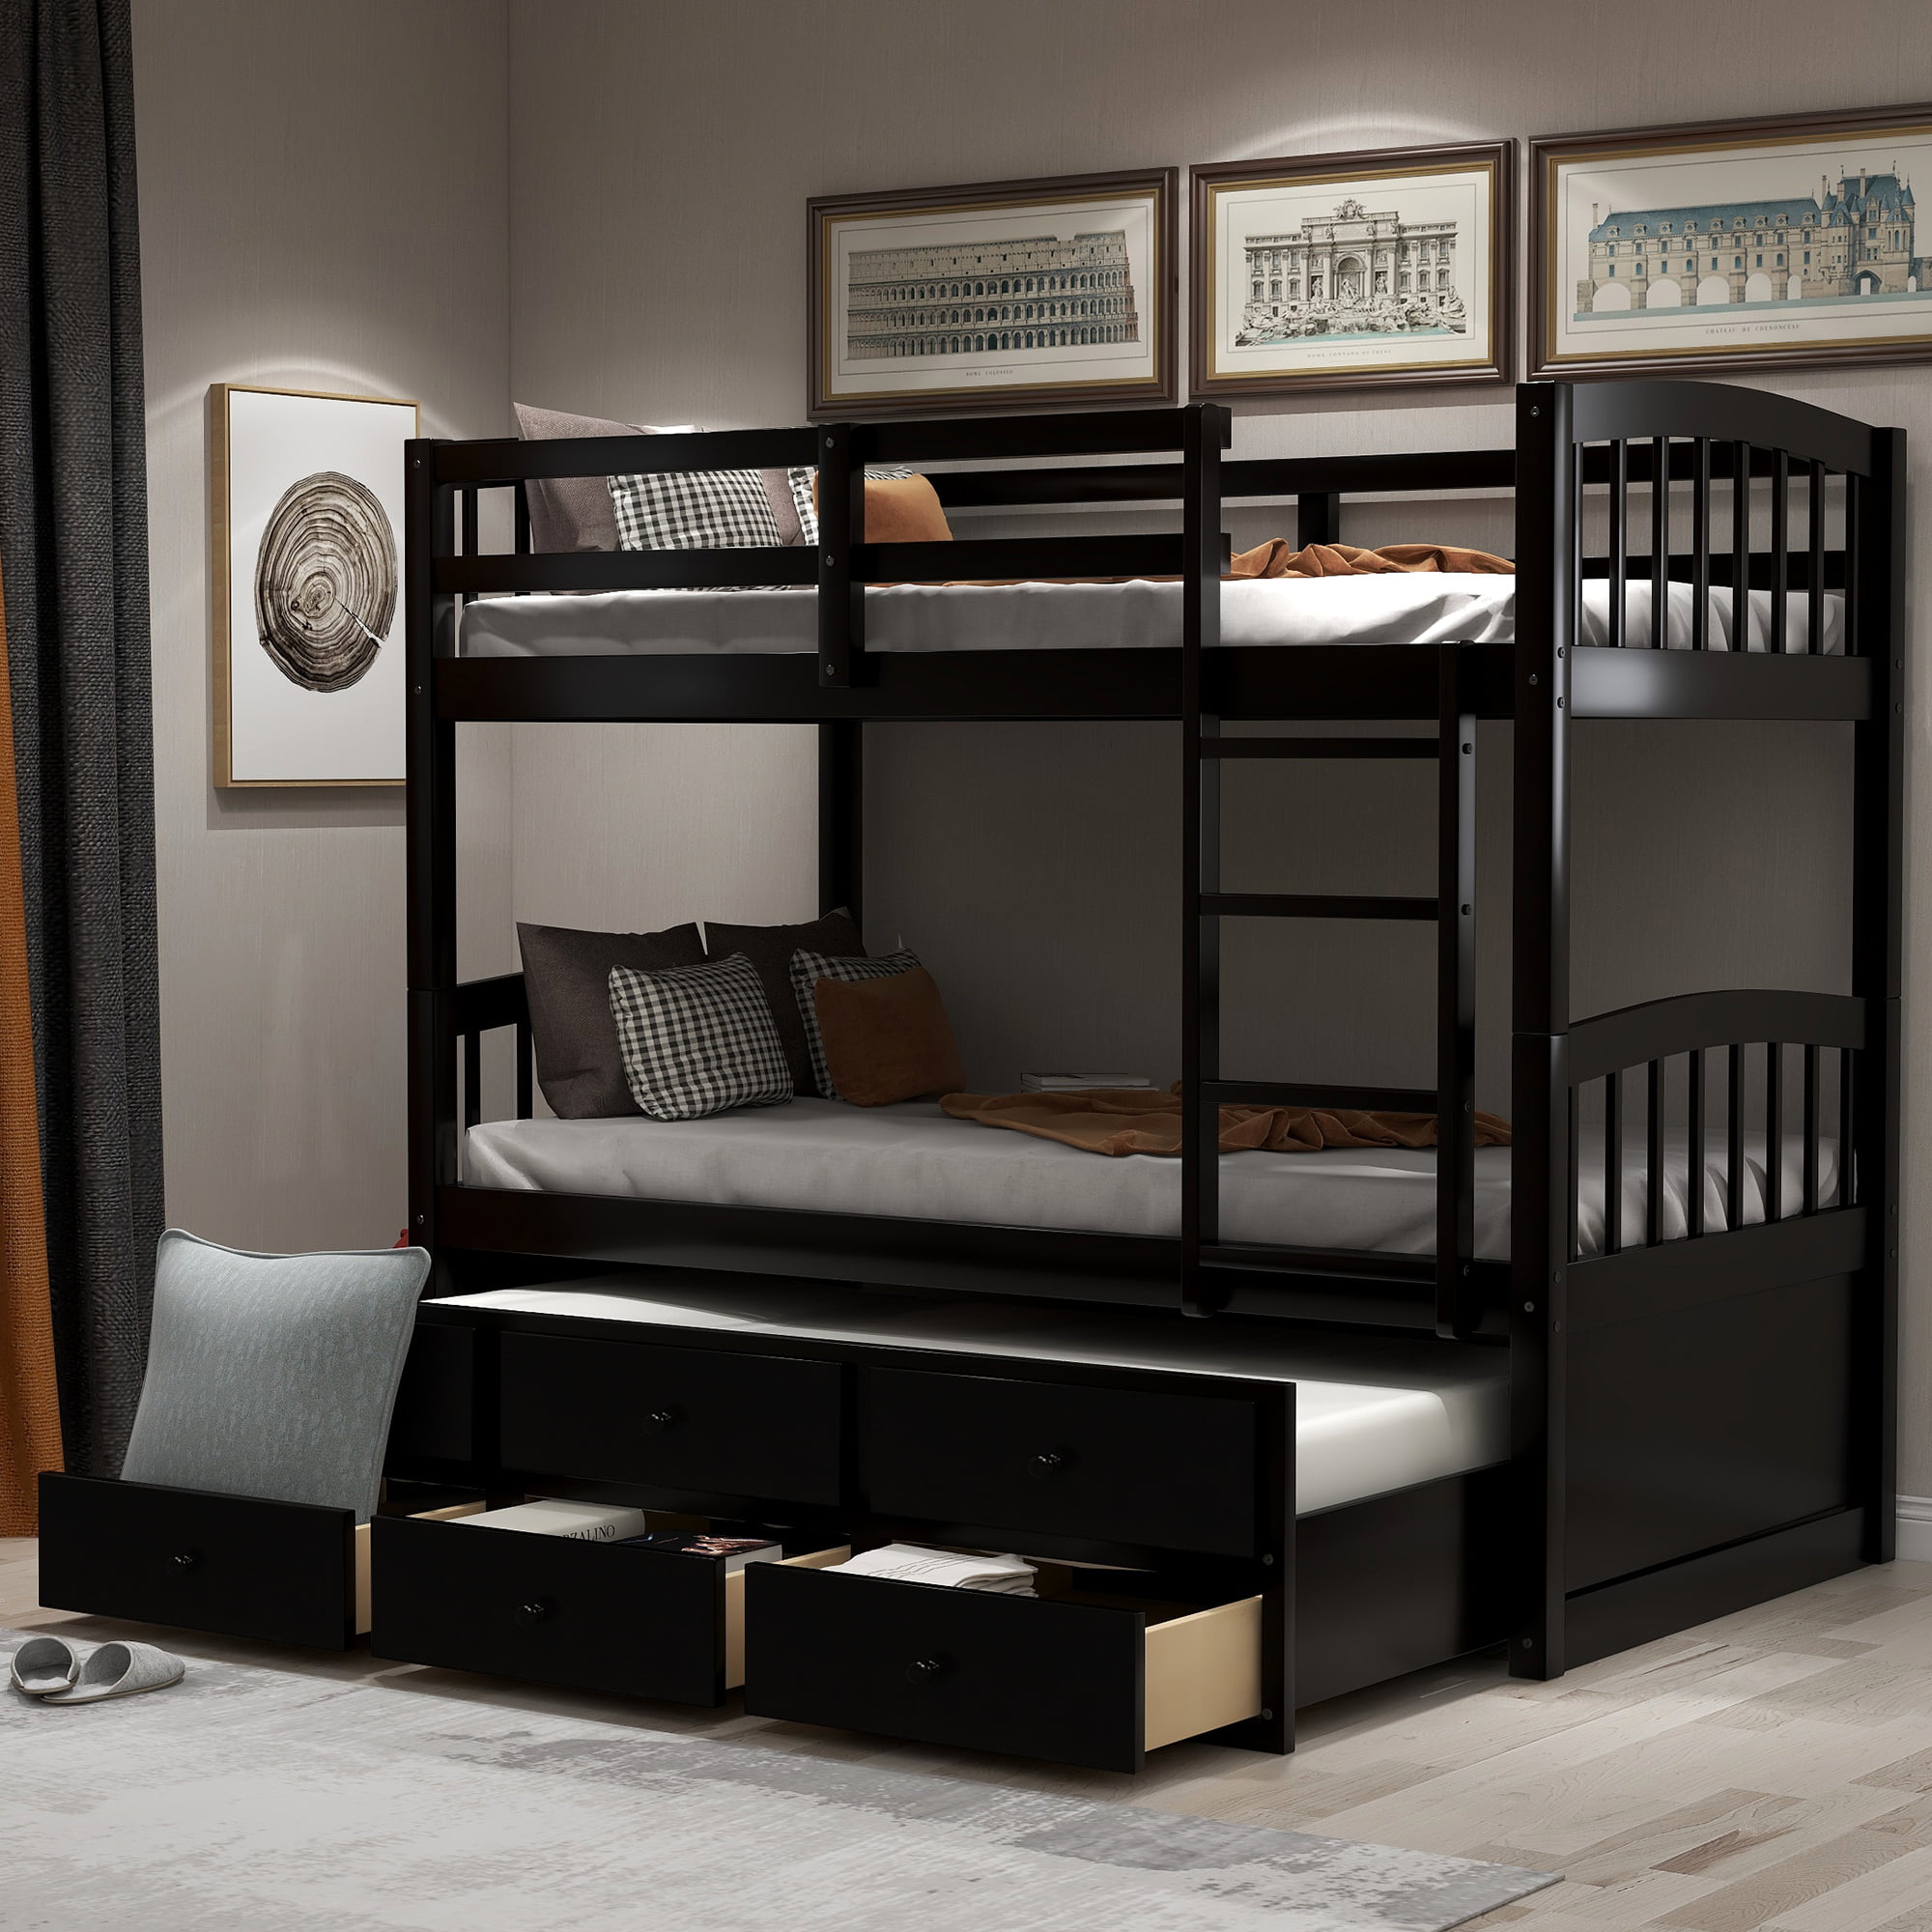 Urhomepro Twin Over Bunk Beds, Wooden Bunk Bed With Trundle And Storage